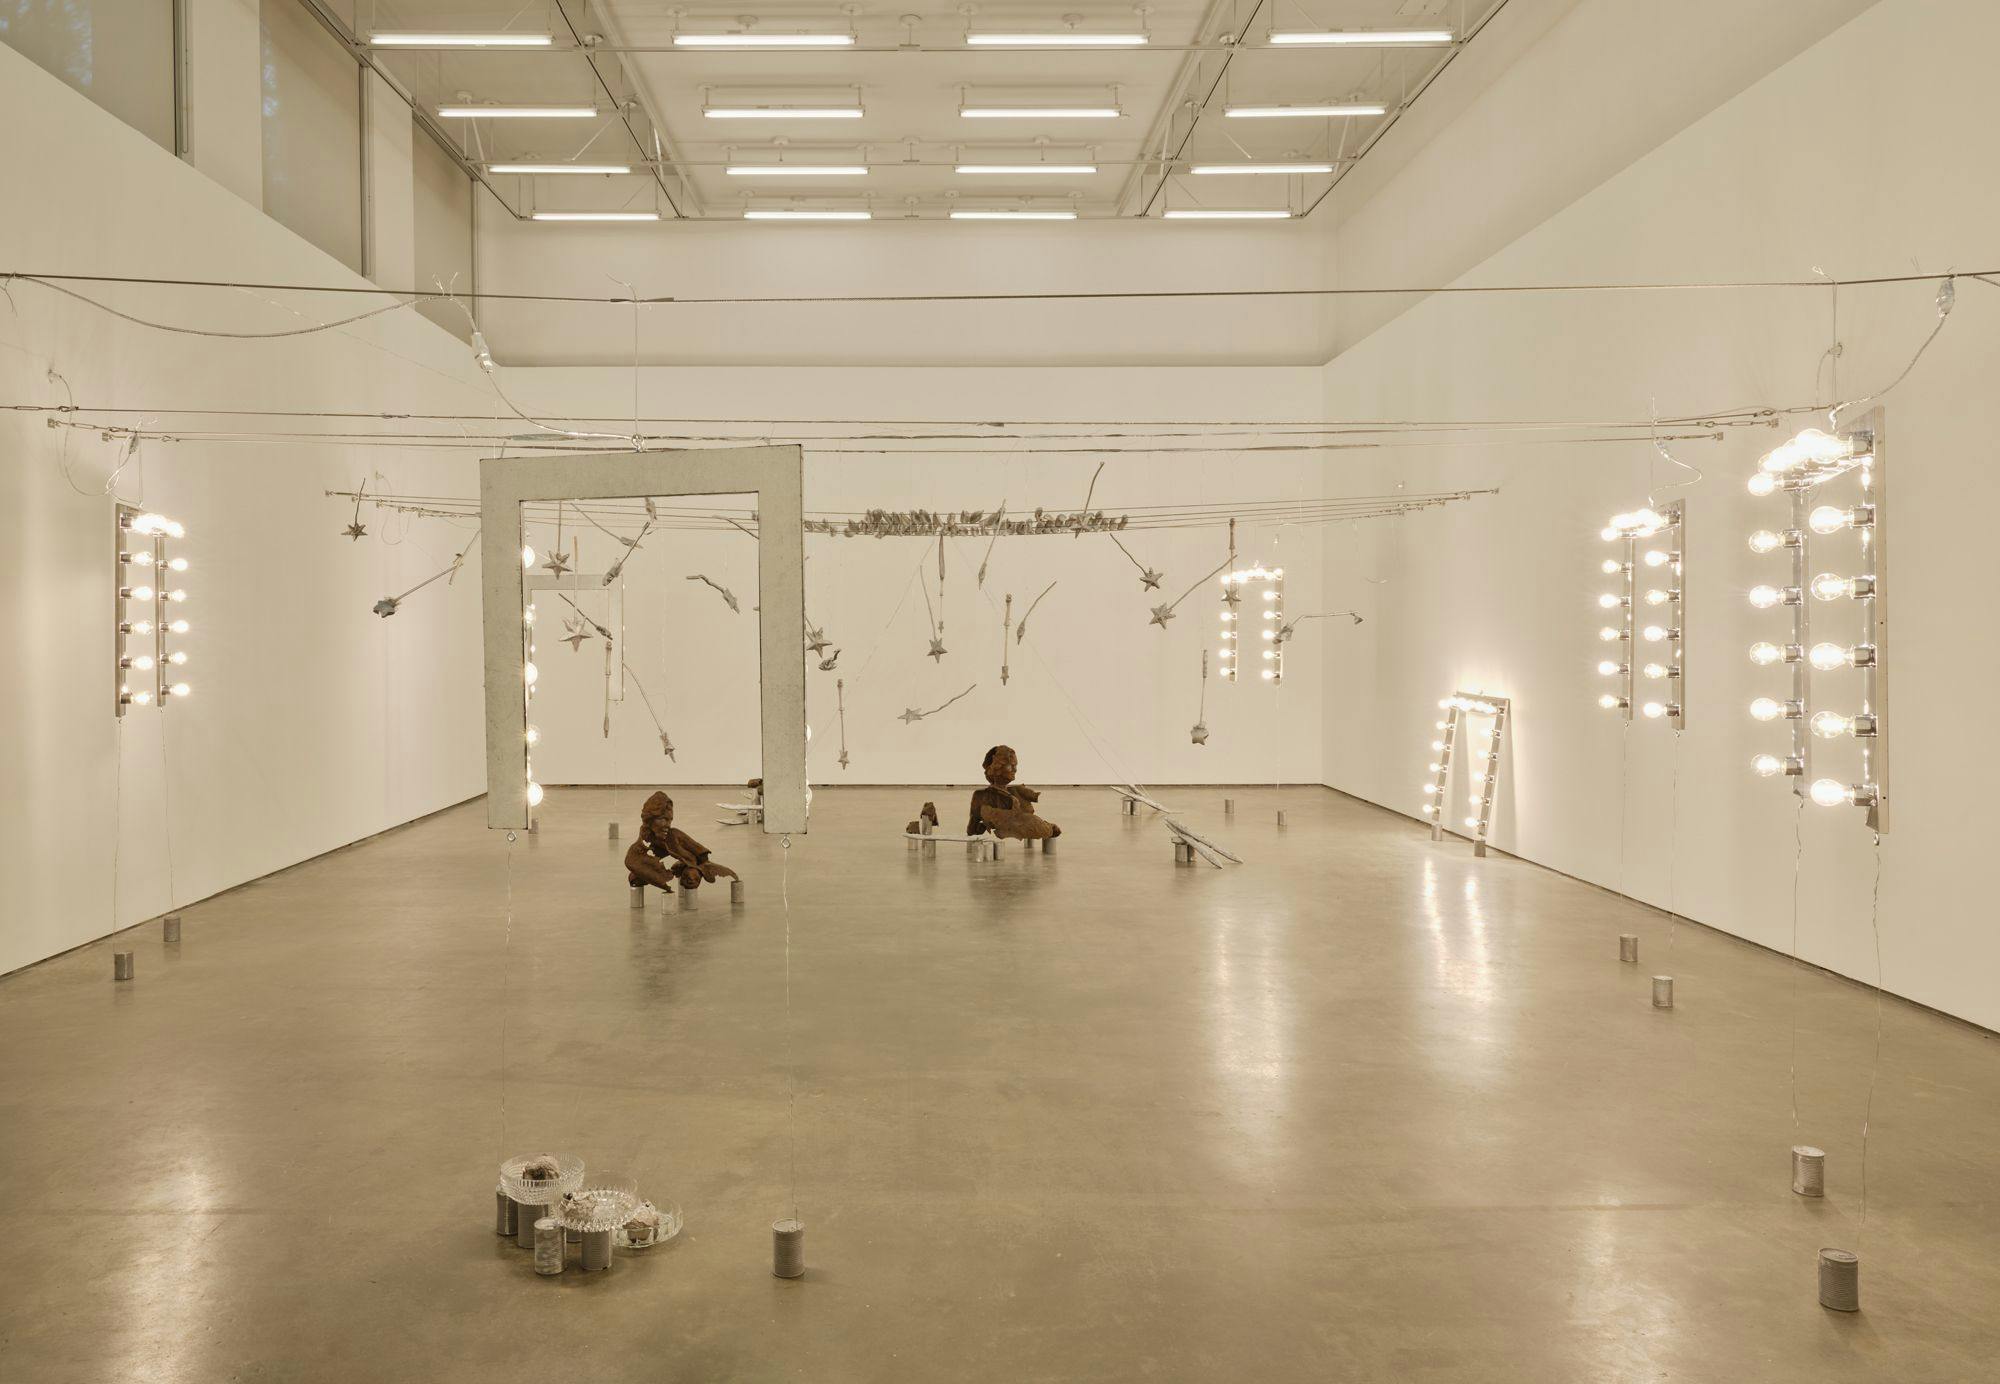 A wide view of several sculptures hanging from wire: magic wands, vanity lights and silver baguettes. Two bronze sulptures of partial human figures sit among aluminum cans, a vanity light, glass bowls, and painted baguettes on the floor.